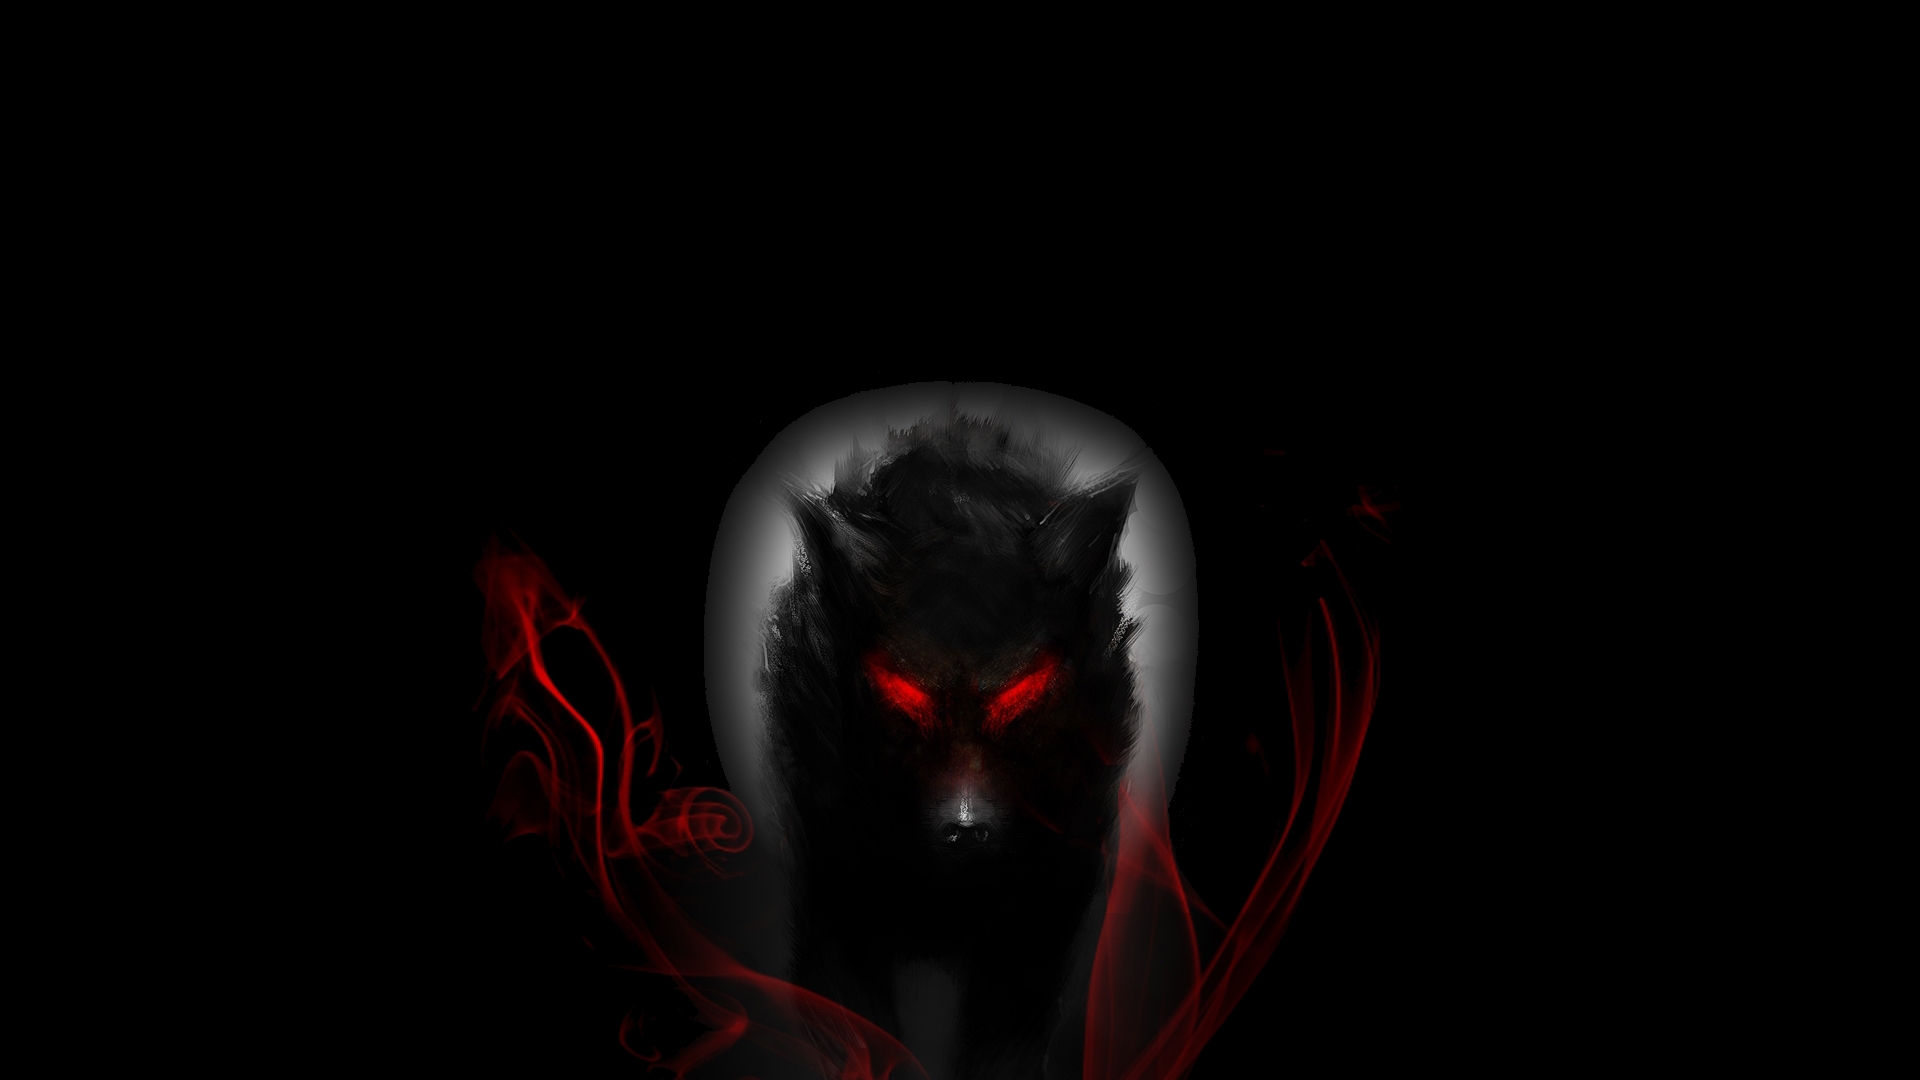 100+] Alpha Wolf Wallpapers | Wallpapers.com